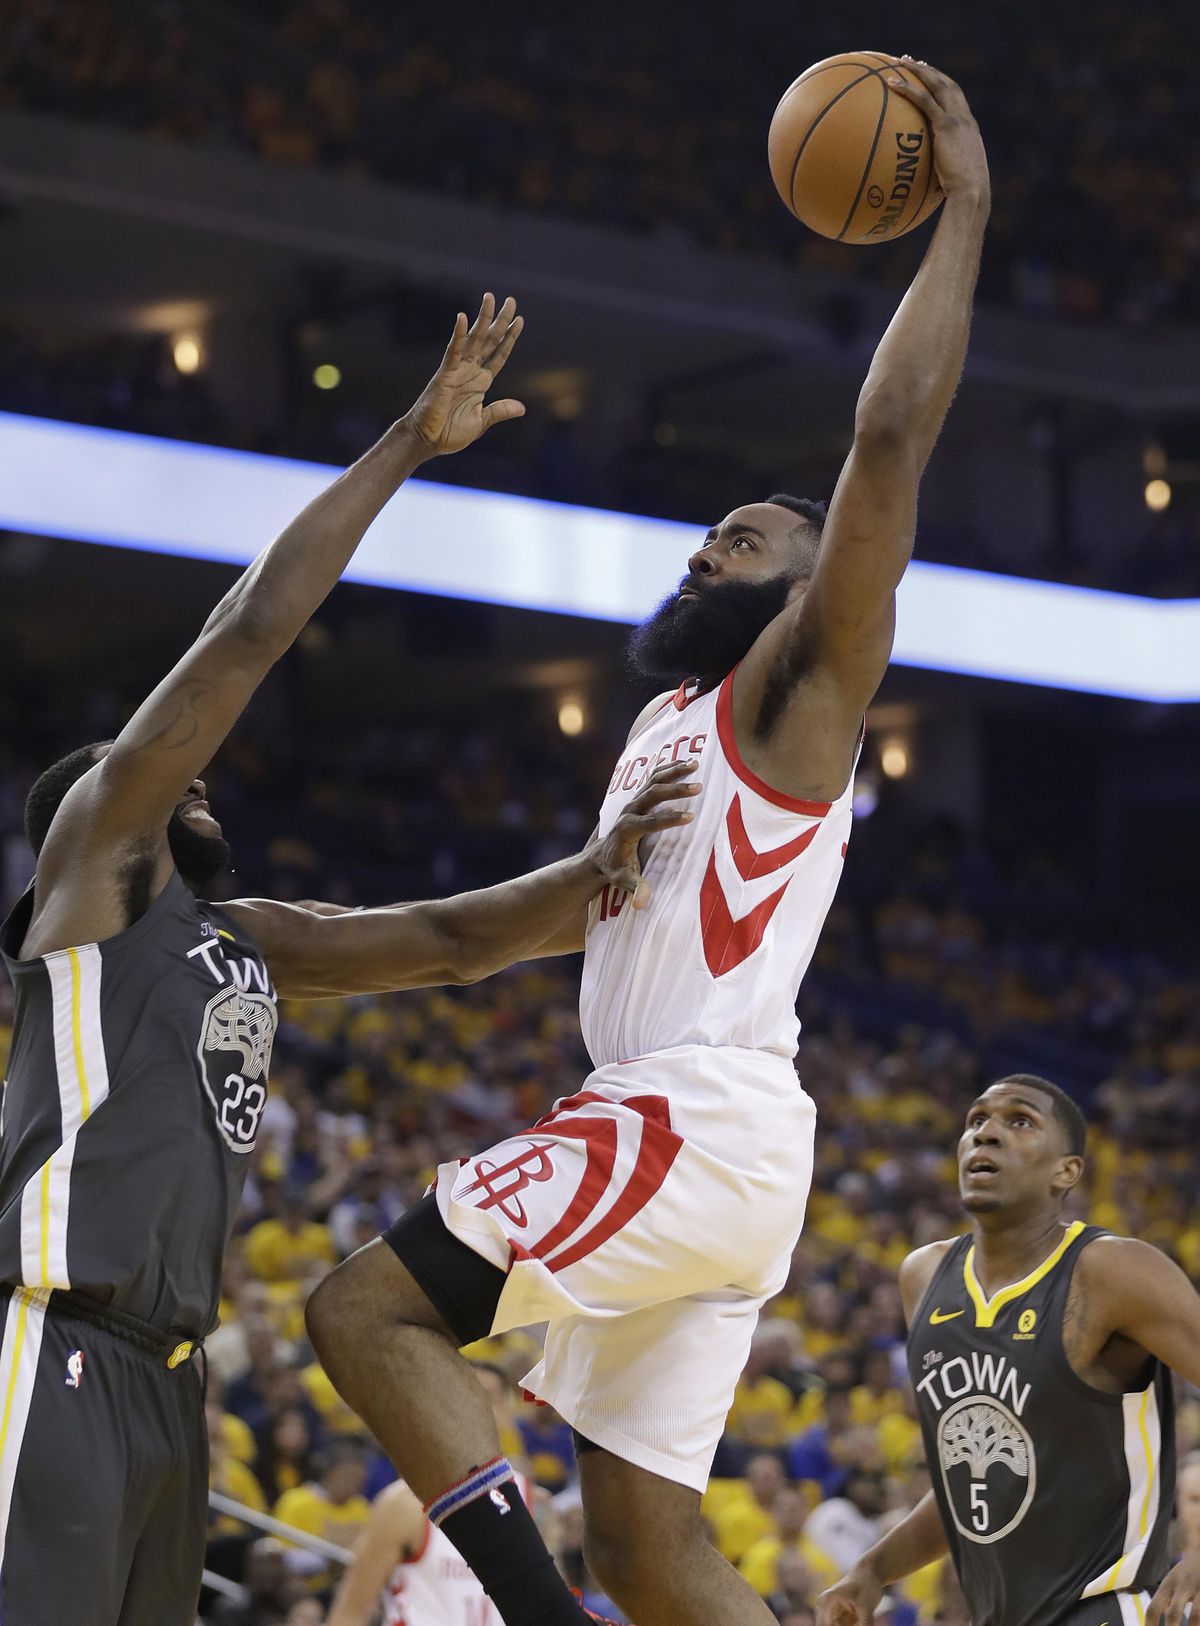 Houston Rockets guard James Harden, center, dunks against Golden State Warriors forward Draymond Green, left, and forward Kevon Looney (5) during the first half of Game 4 of the NBA basketball Western Conference Finals in Oakland, Calif., Tuesday, May 22, 2018. (AP Photo/Marcio Jose Sanchez) ORG XMIT: OAS122 (Marcio Jose Sanchez / AP)